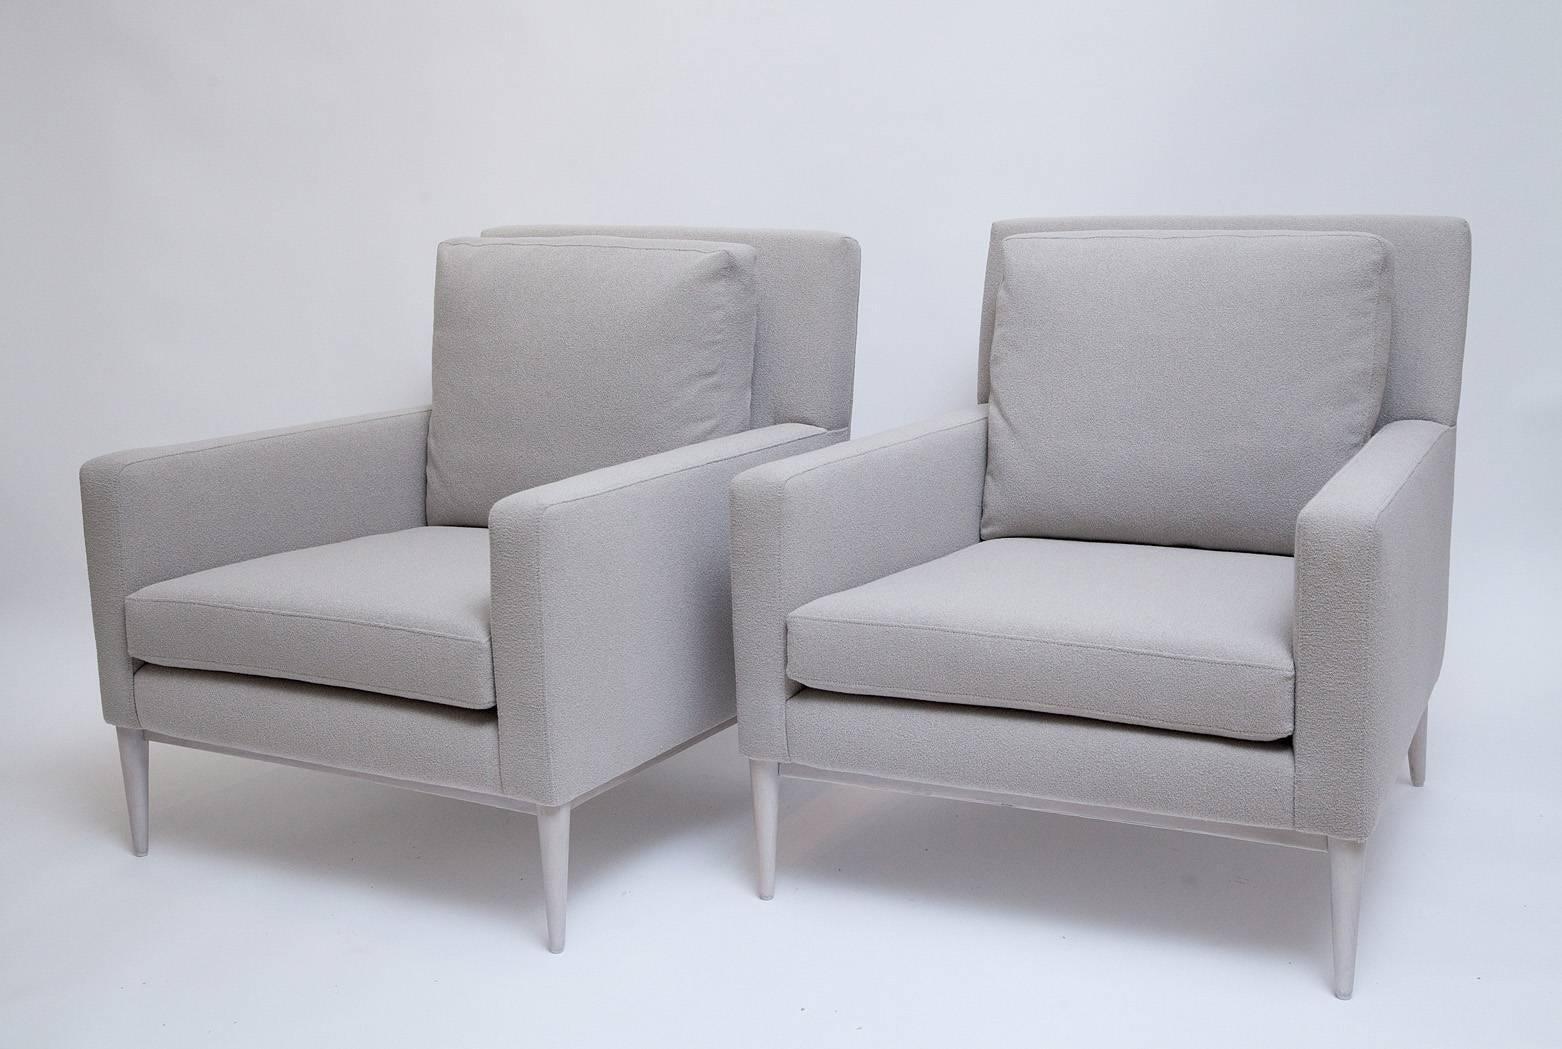 Gorgeous and iconic Mid-Century pair of fully restored lounge chairs by Paul McCobb for Directional with bleached walnut legs and all new foam with down wrapped back cushions, upholstered in a pale greige Beacon Hill wool blend, super-fine bouclé.